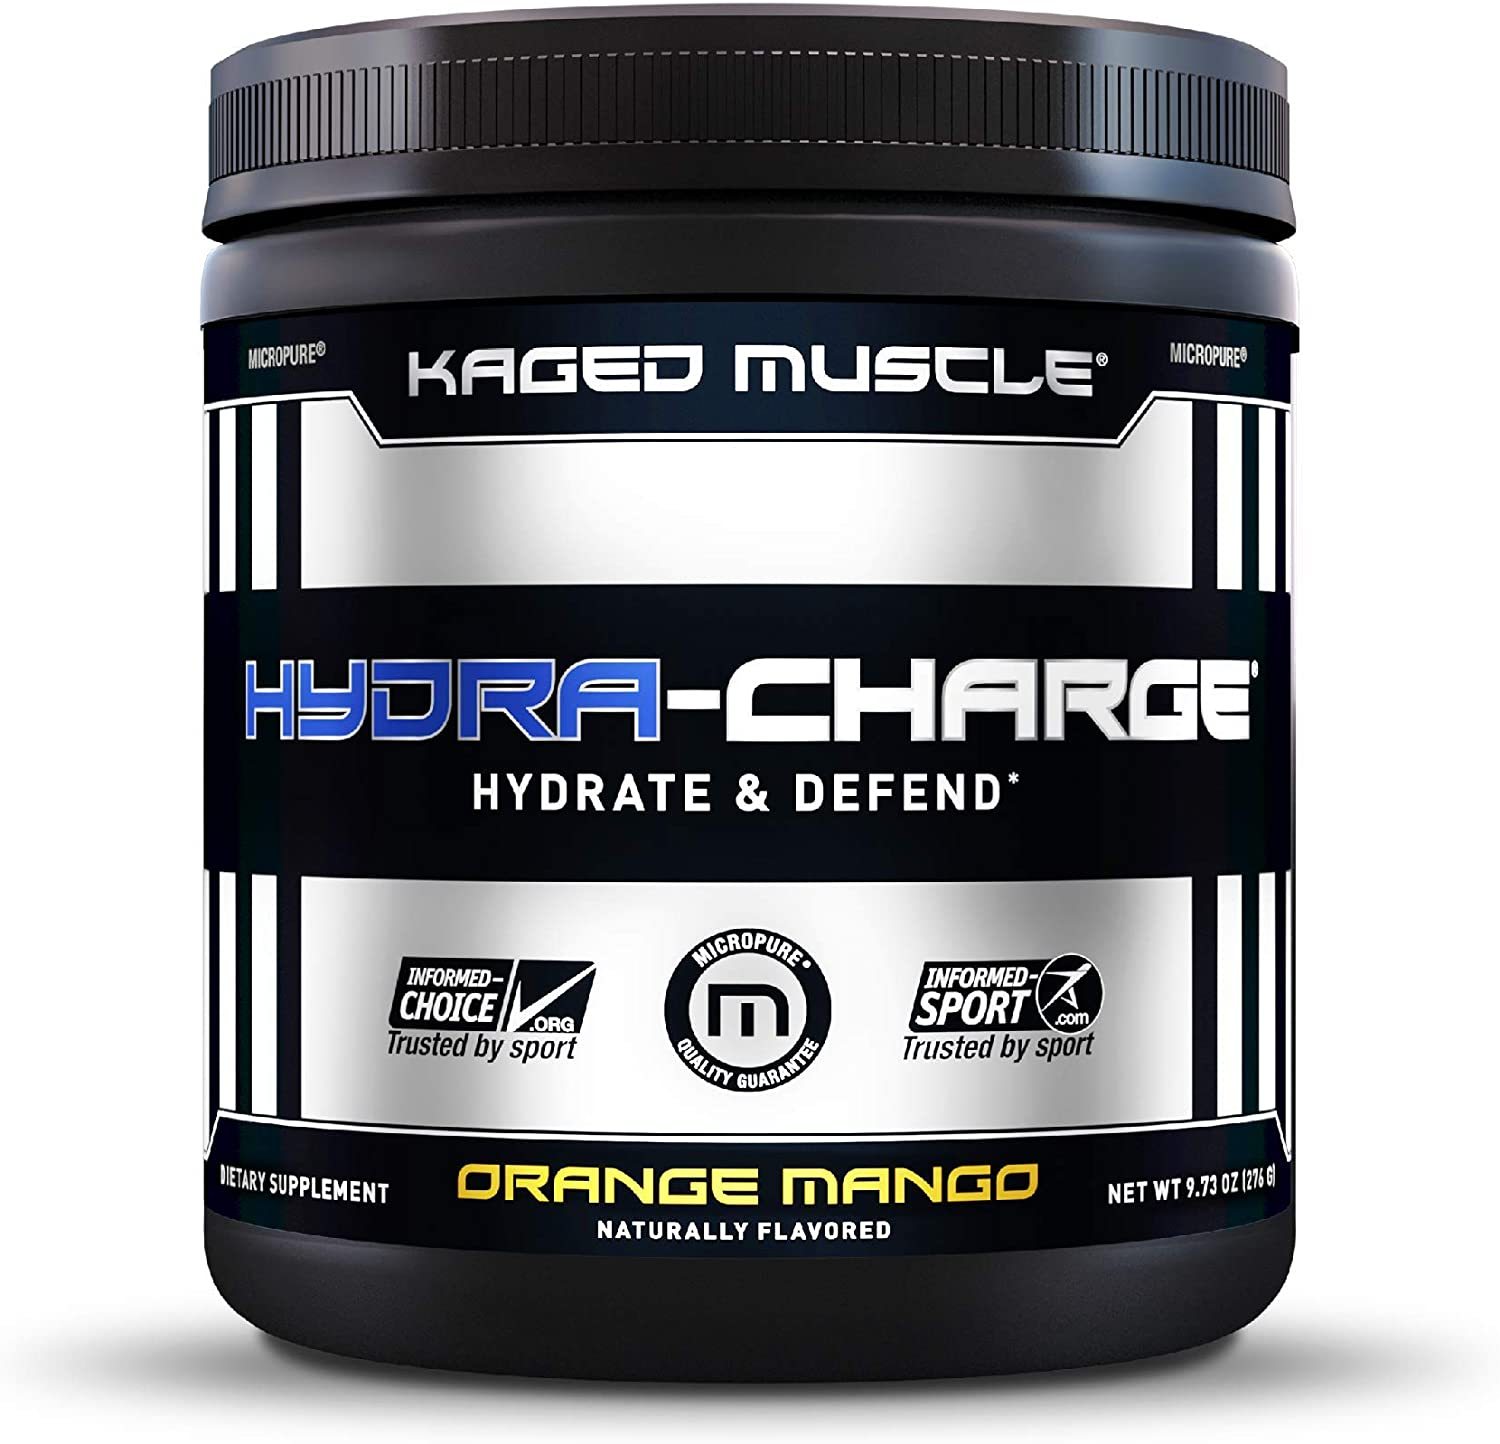 KAGED MUSCLE HYDRA-CHARGE Hydrate & Defend ORANGE MANGO 60 servings net.wt. 9.73 - $34.99